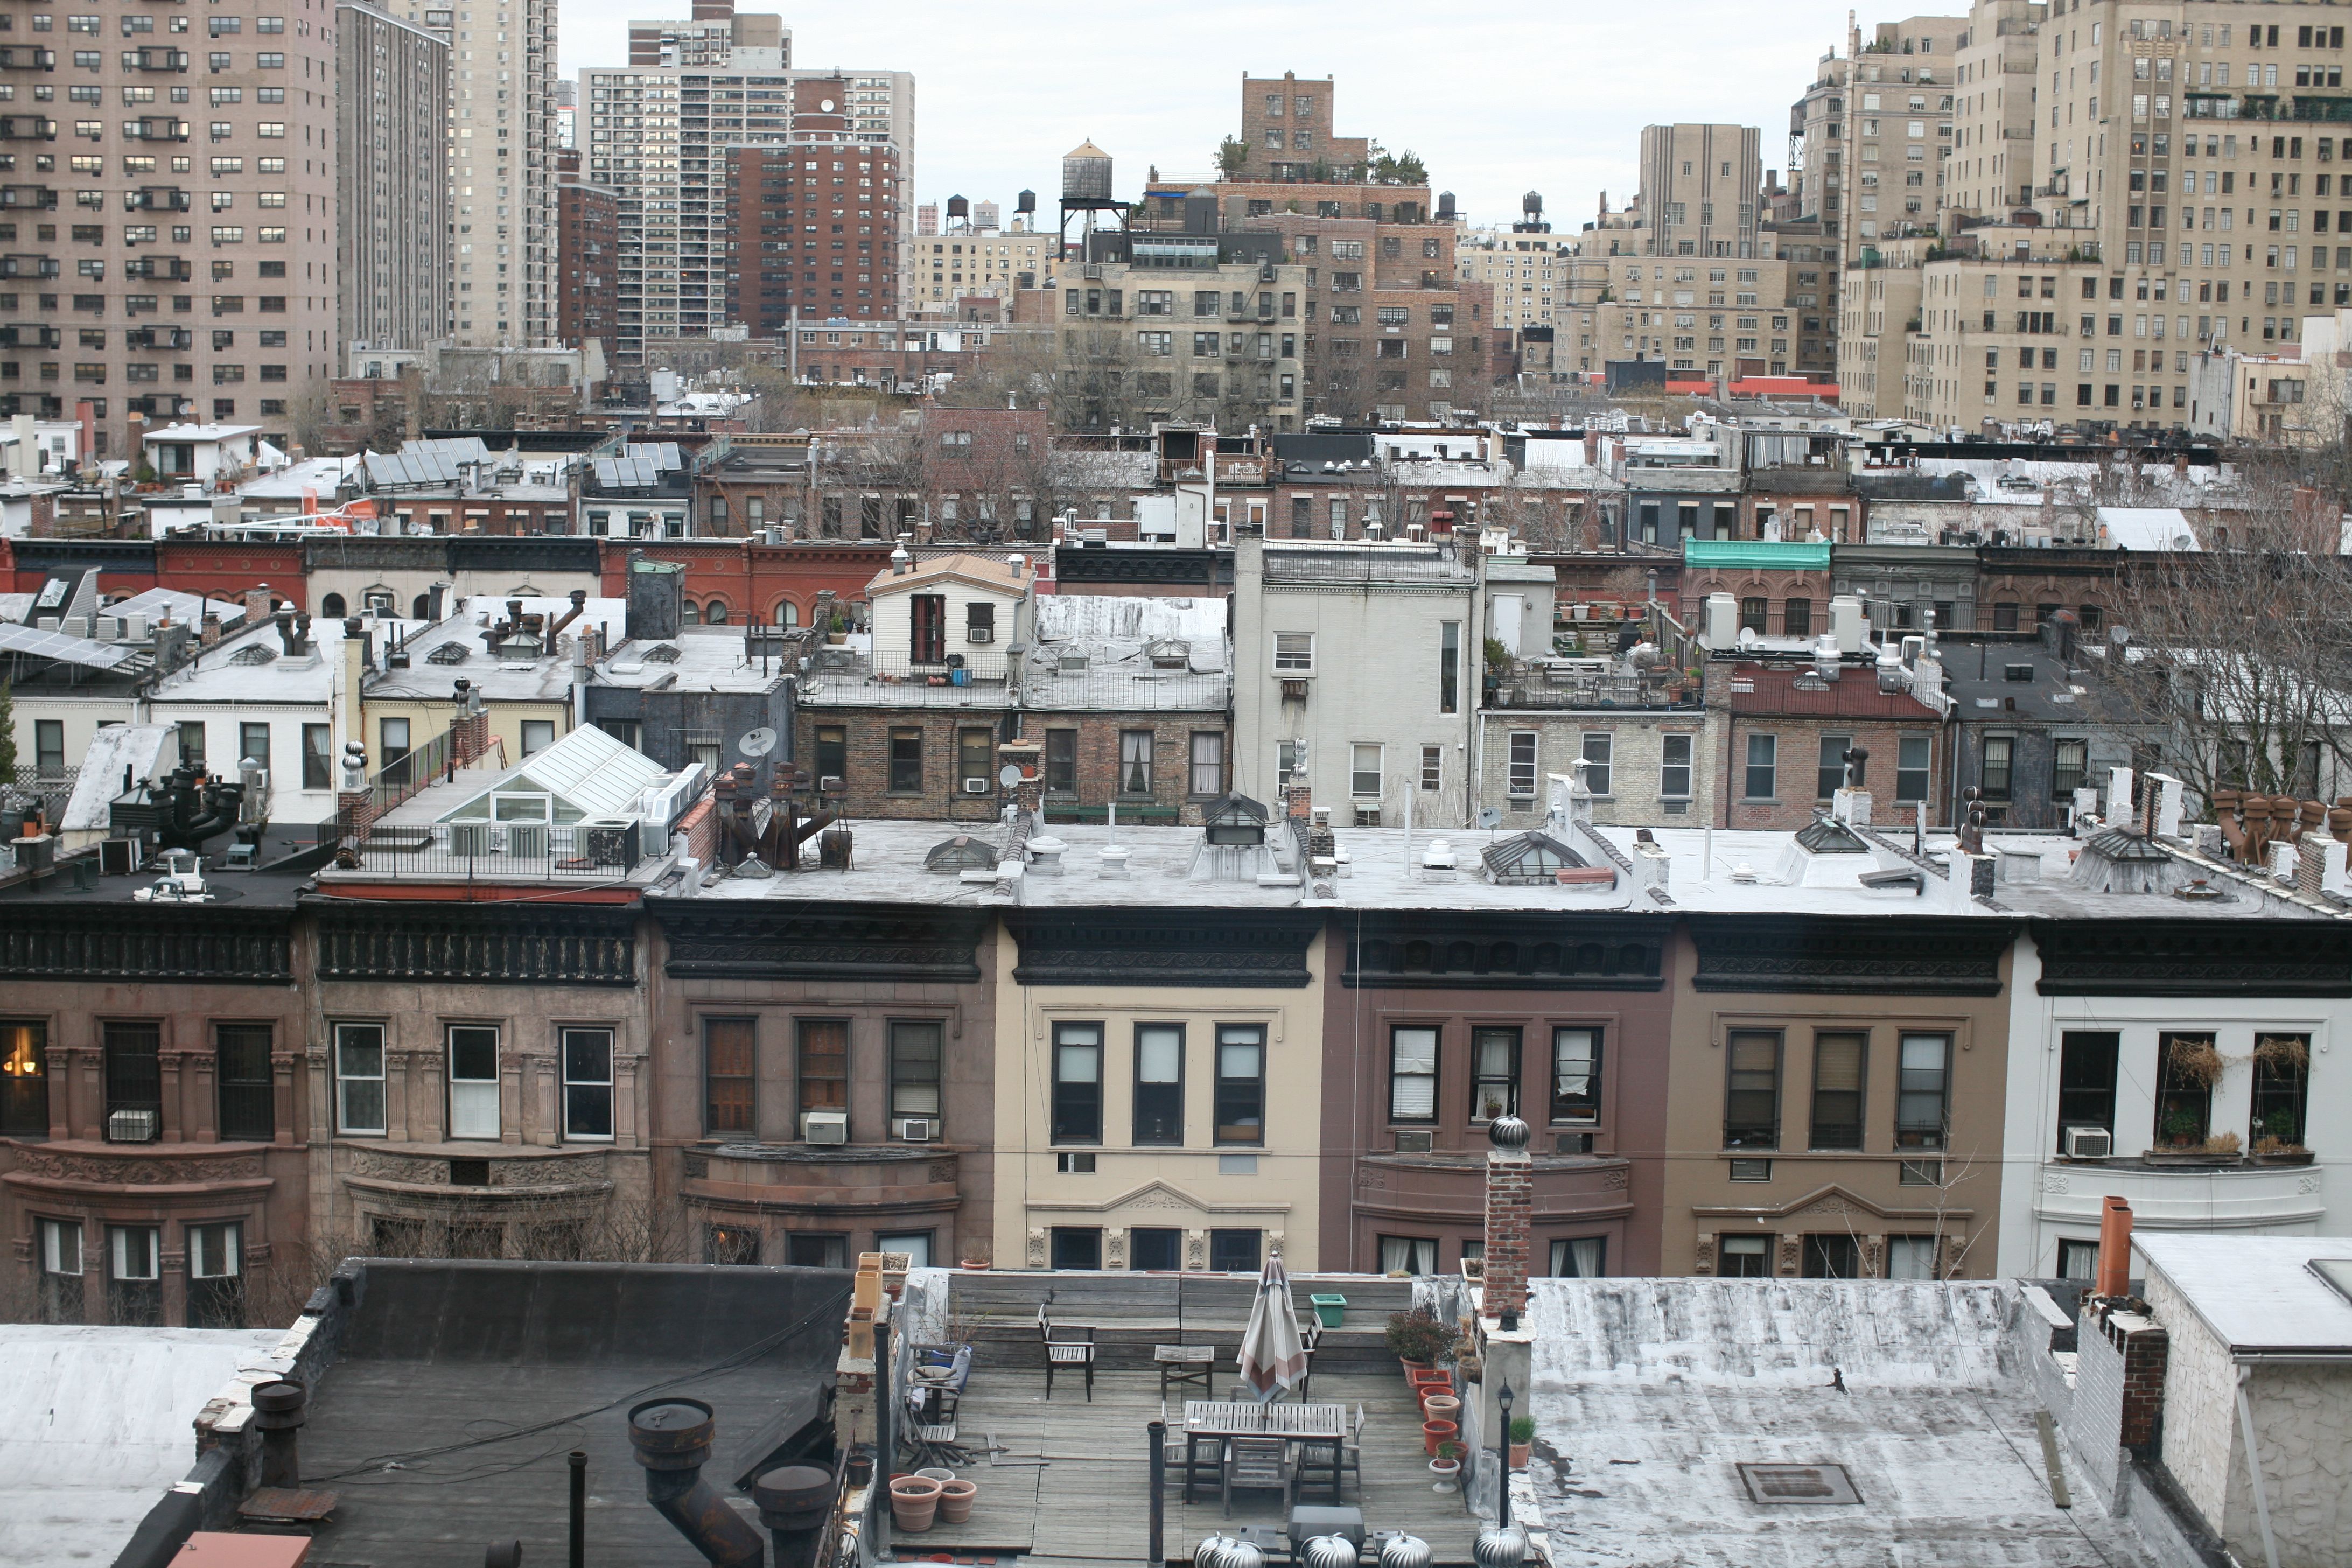 New York City Rooftops by Day & Night Light-2 photos – Ruth E ...